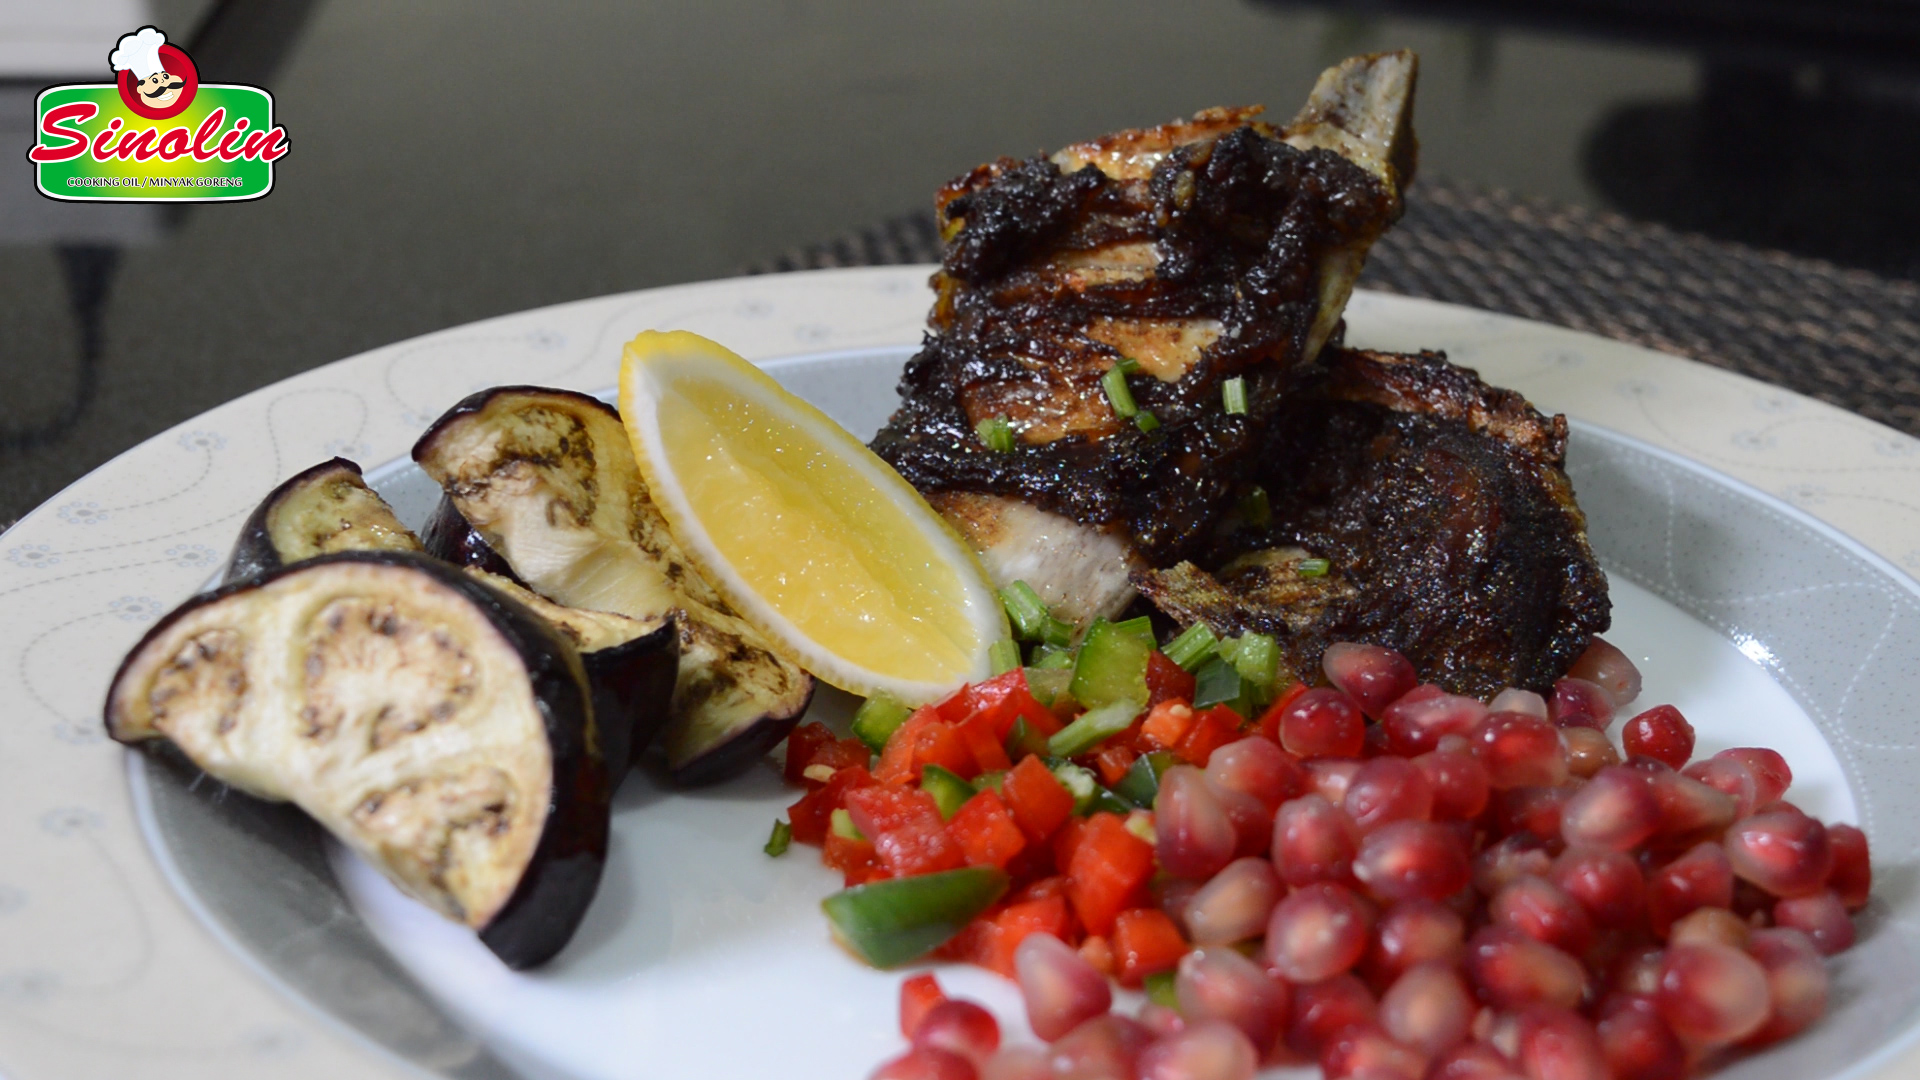 Roasted Aubergine With Pomegranate and baked Beef Ribs by Dapur Sinolin